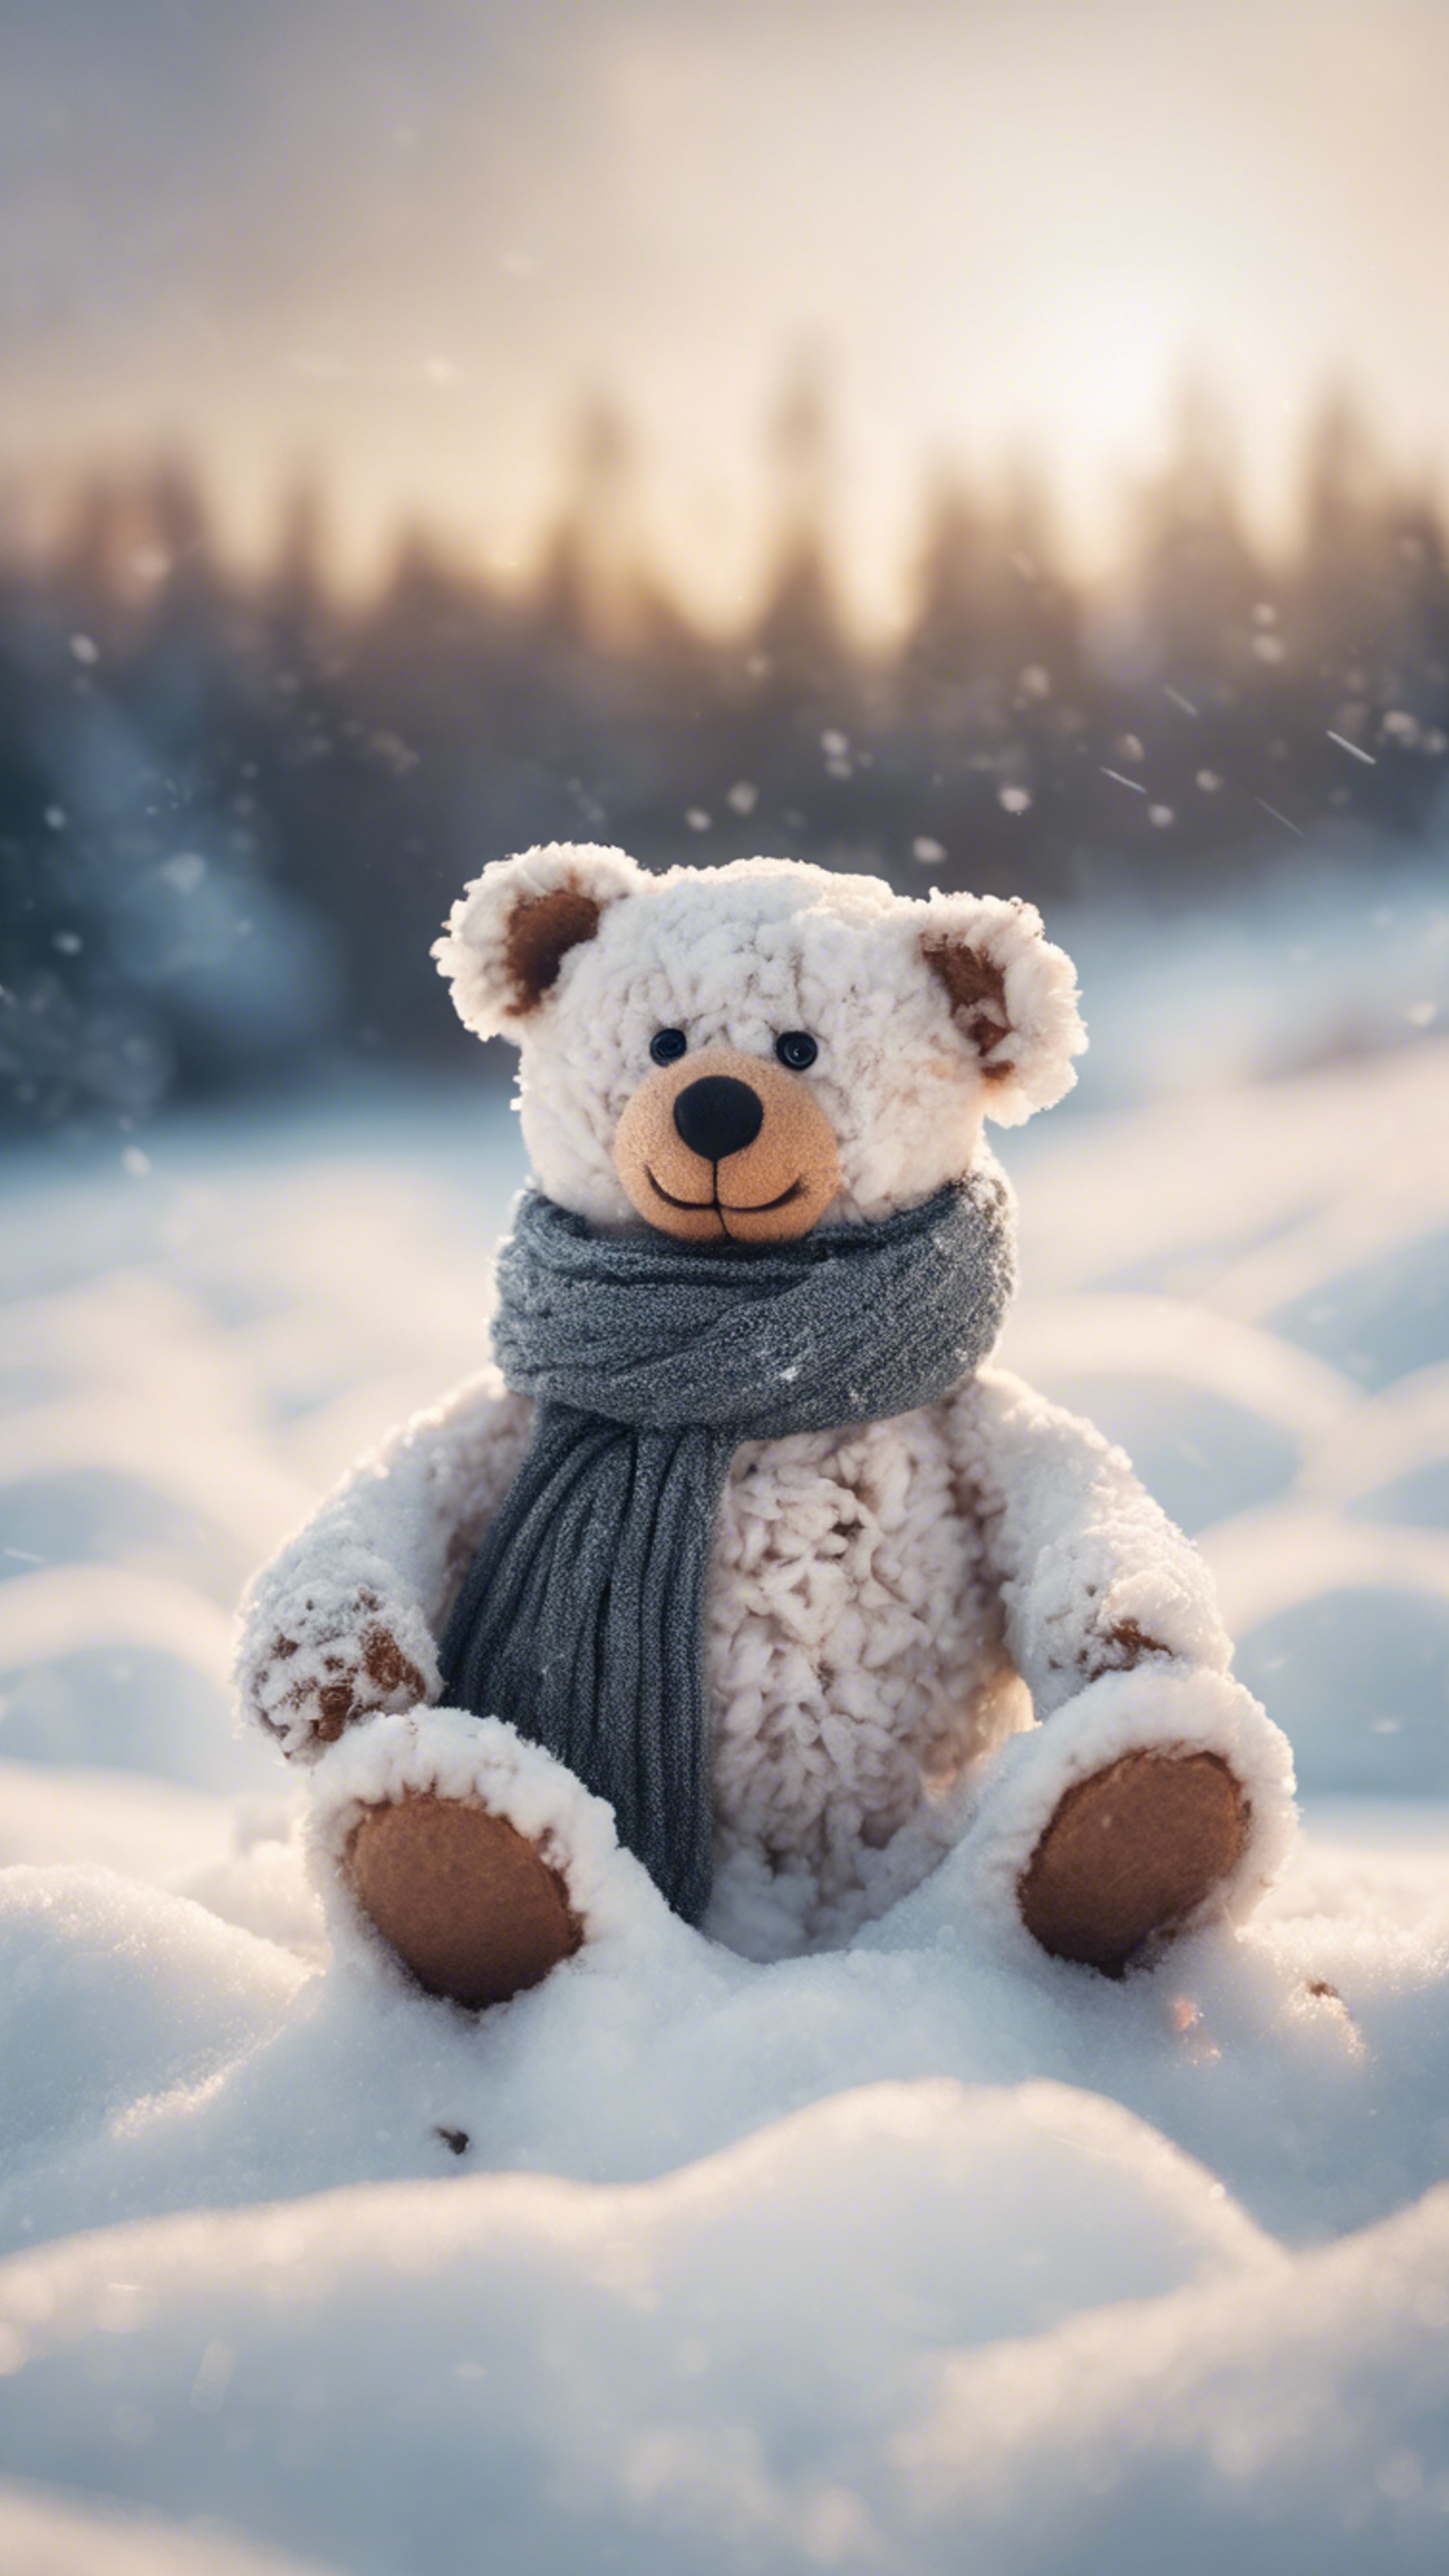 A snow teddy bear, complete with scarf and carrot nose, in a snowy landscape.壁紙[494492b943894866a018]